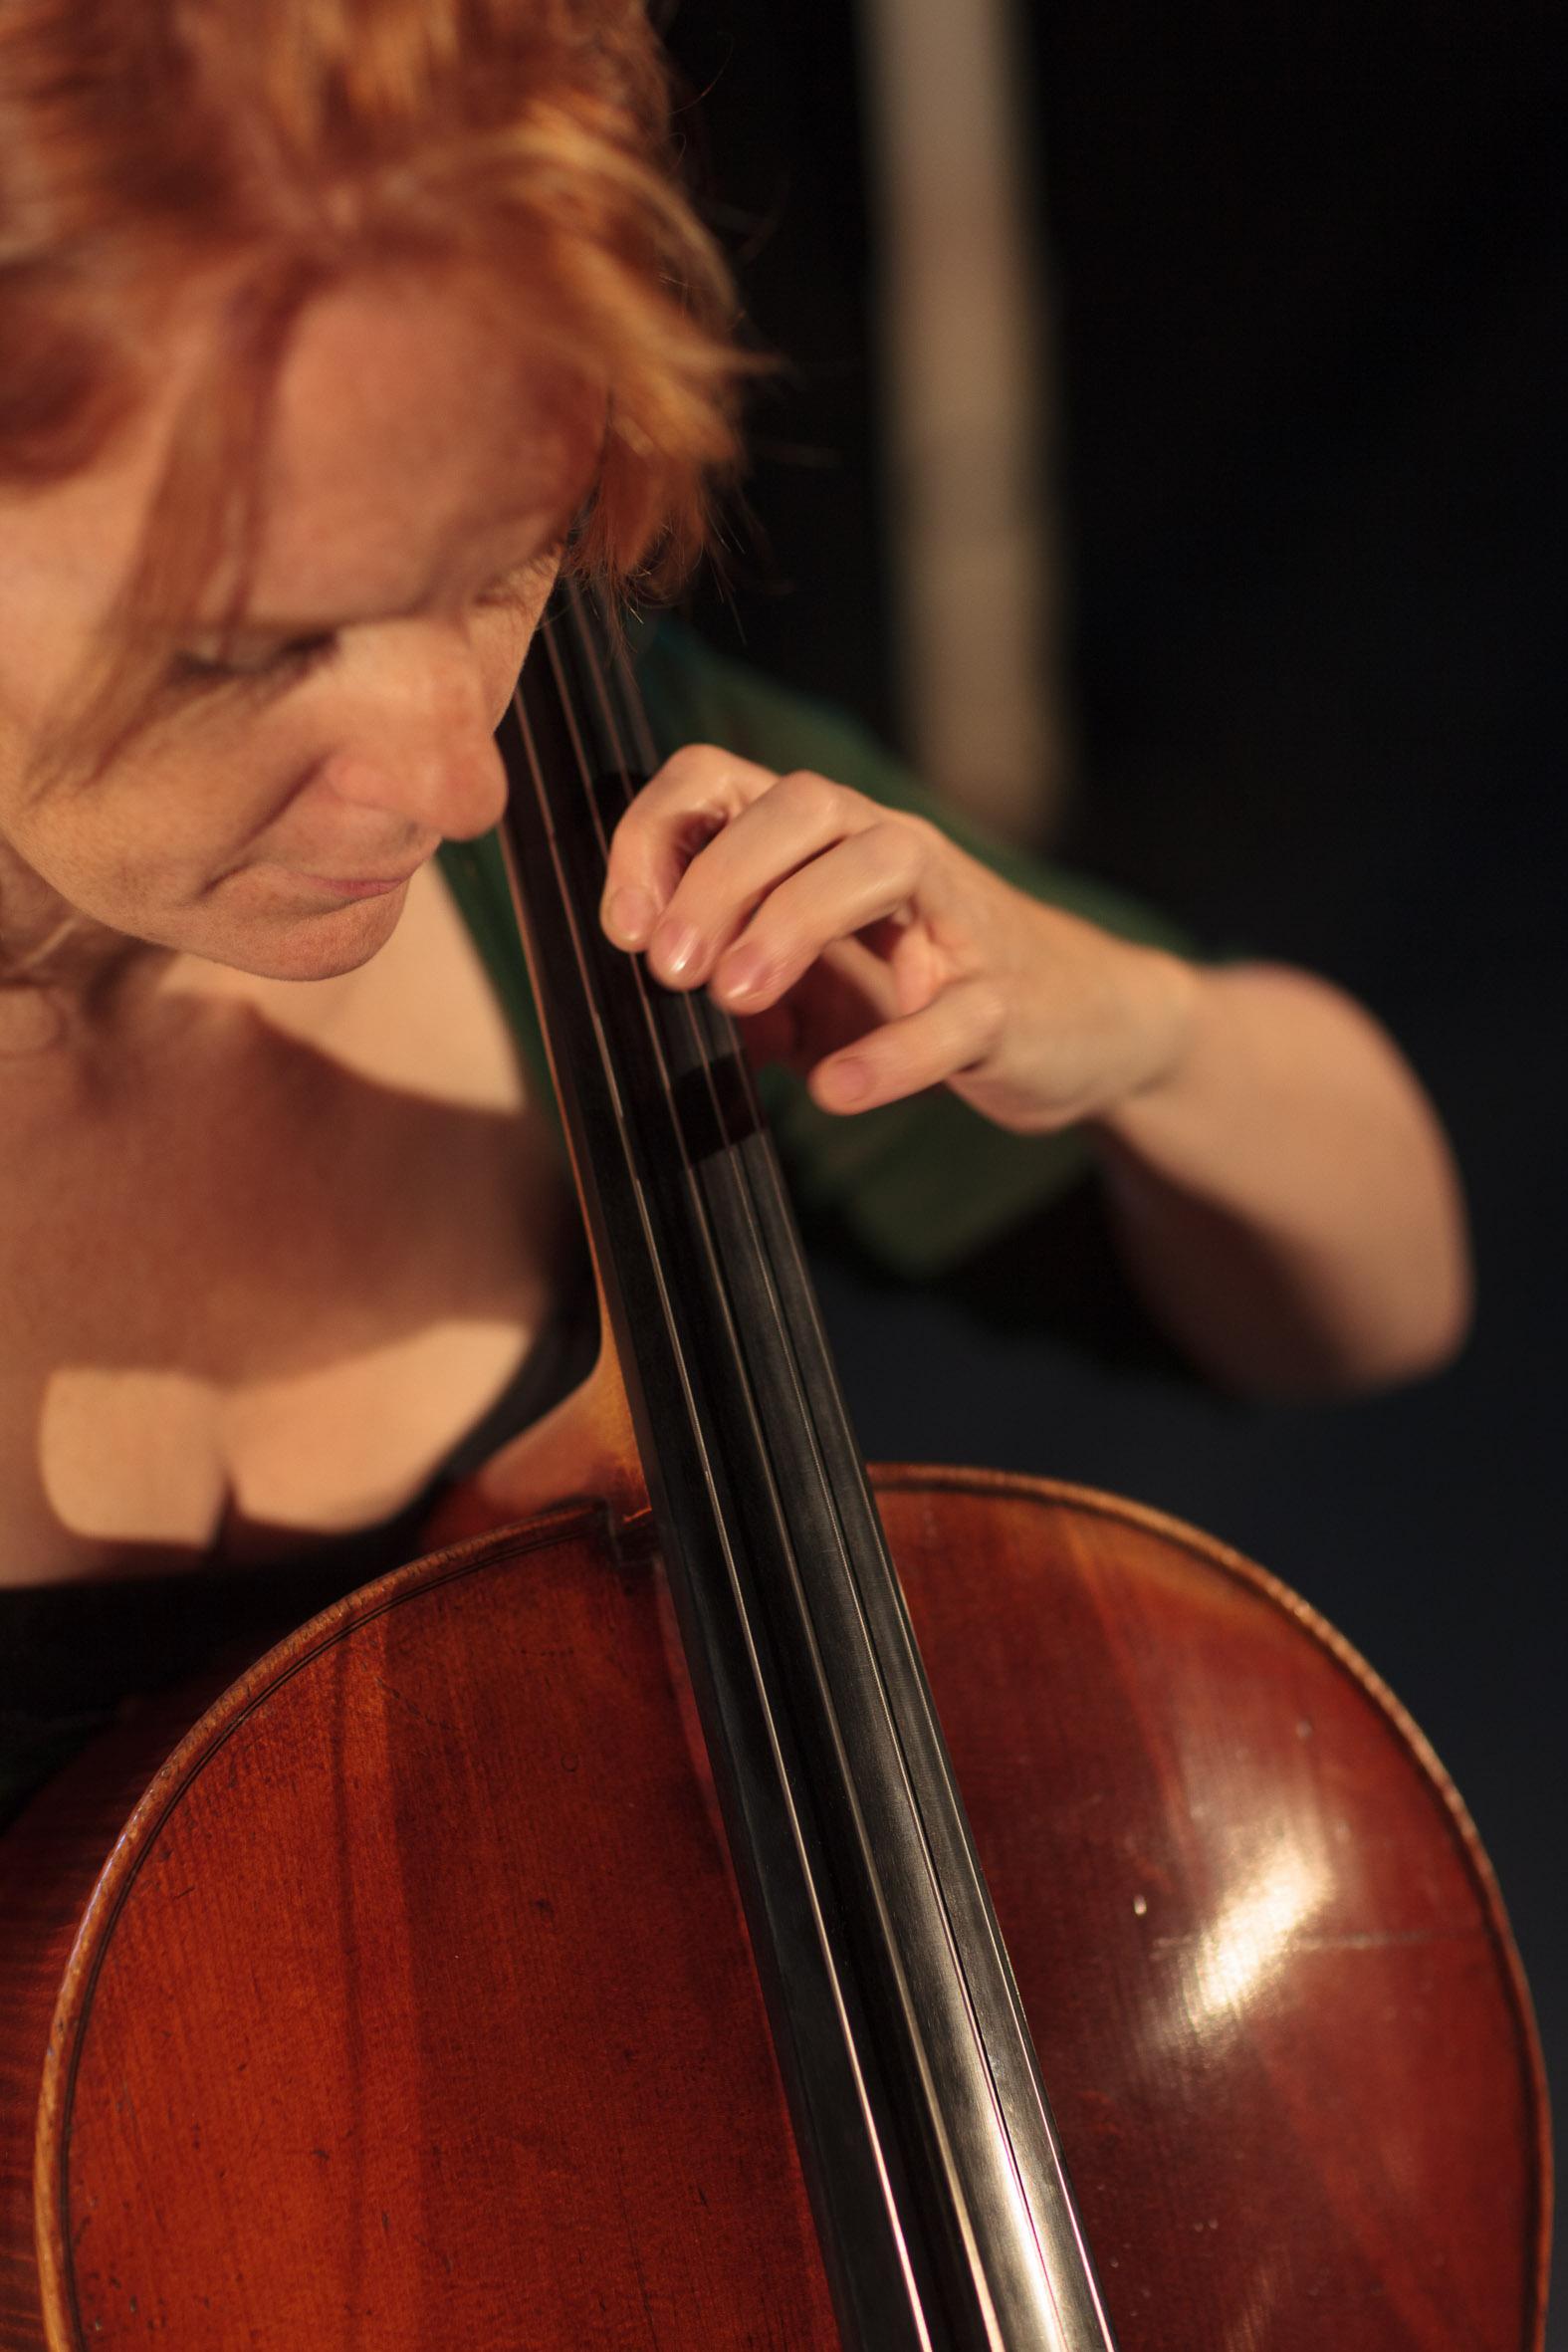 a young white woman with red hair tied back at the sides, wearing a green dress and playing the cello